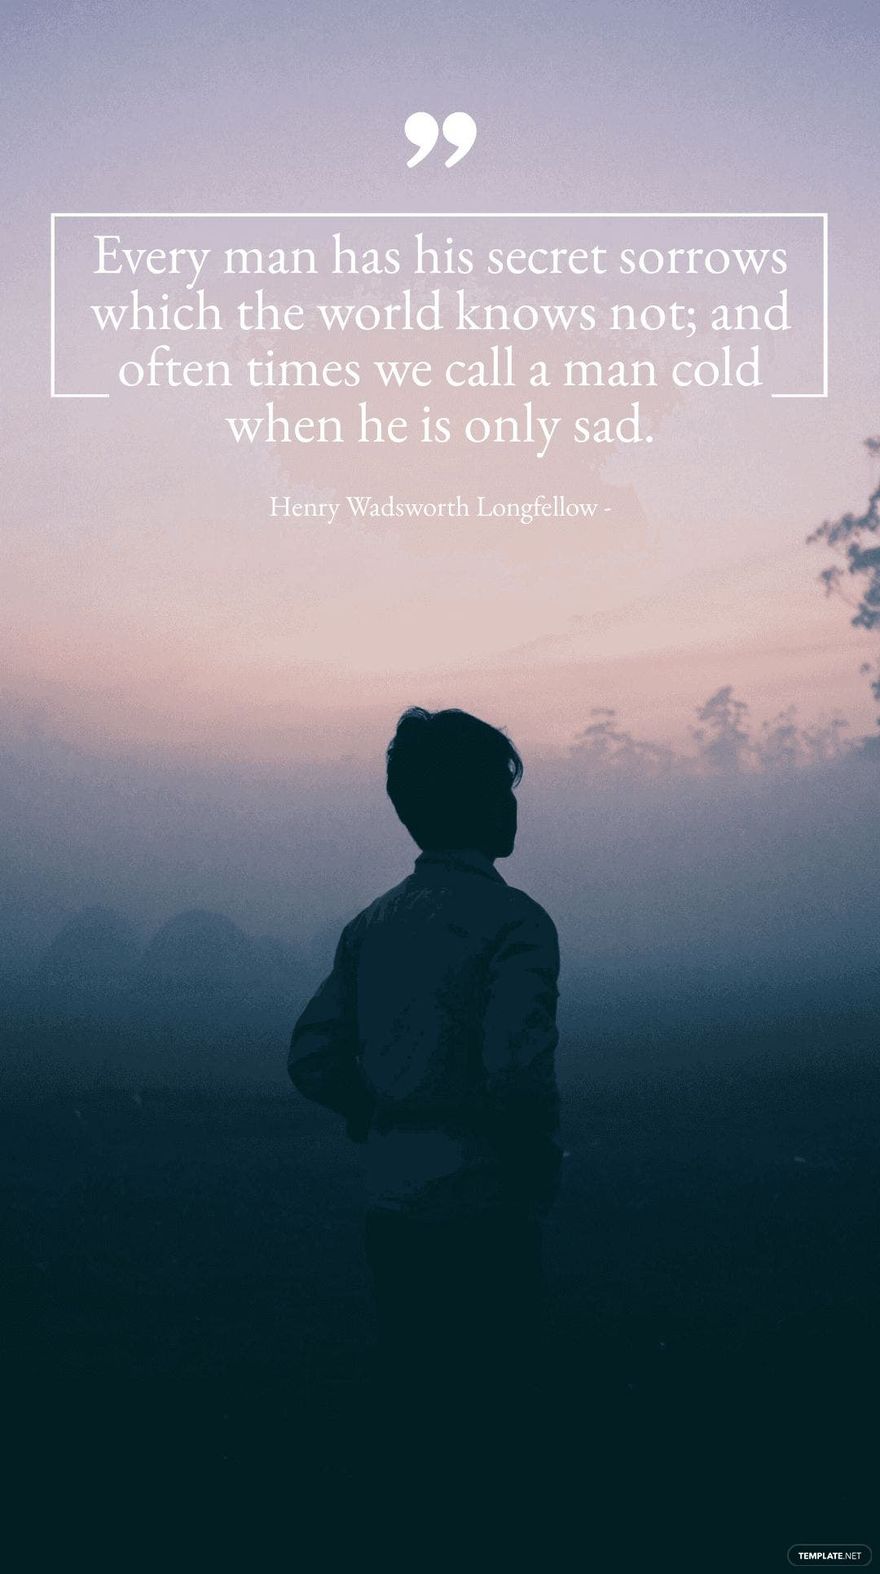 Henry Wadsworth Longfellow - Every man has his secret sorrows which the world knows not; and often times we call a man cold when he is only sad.